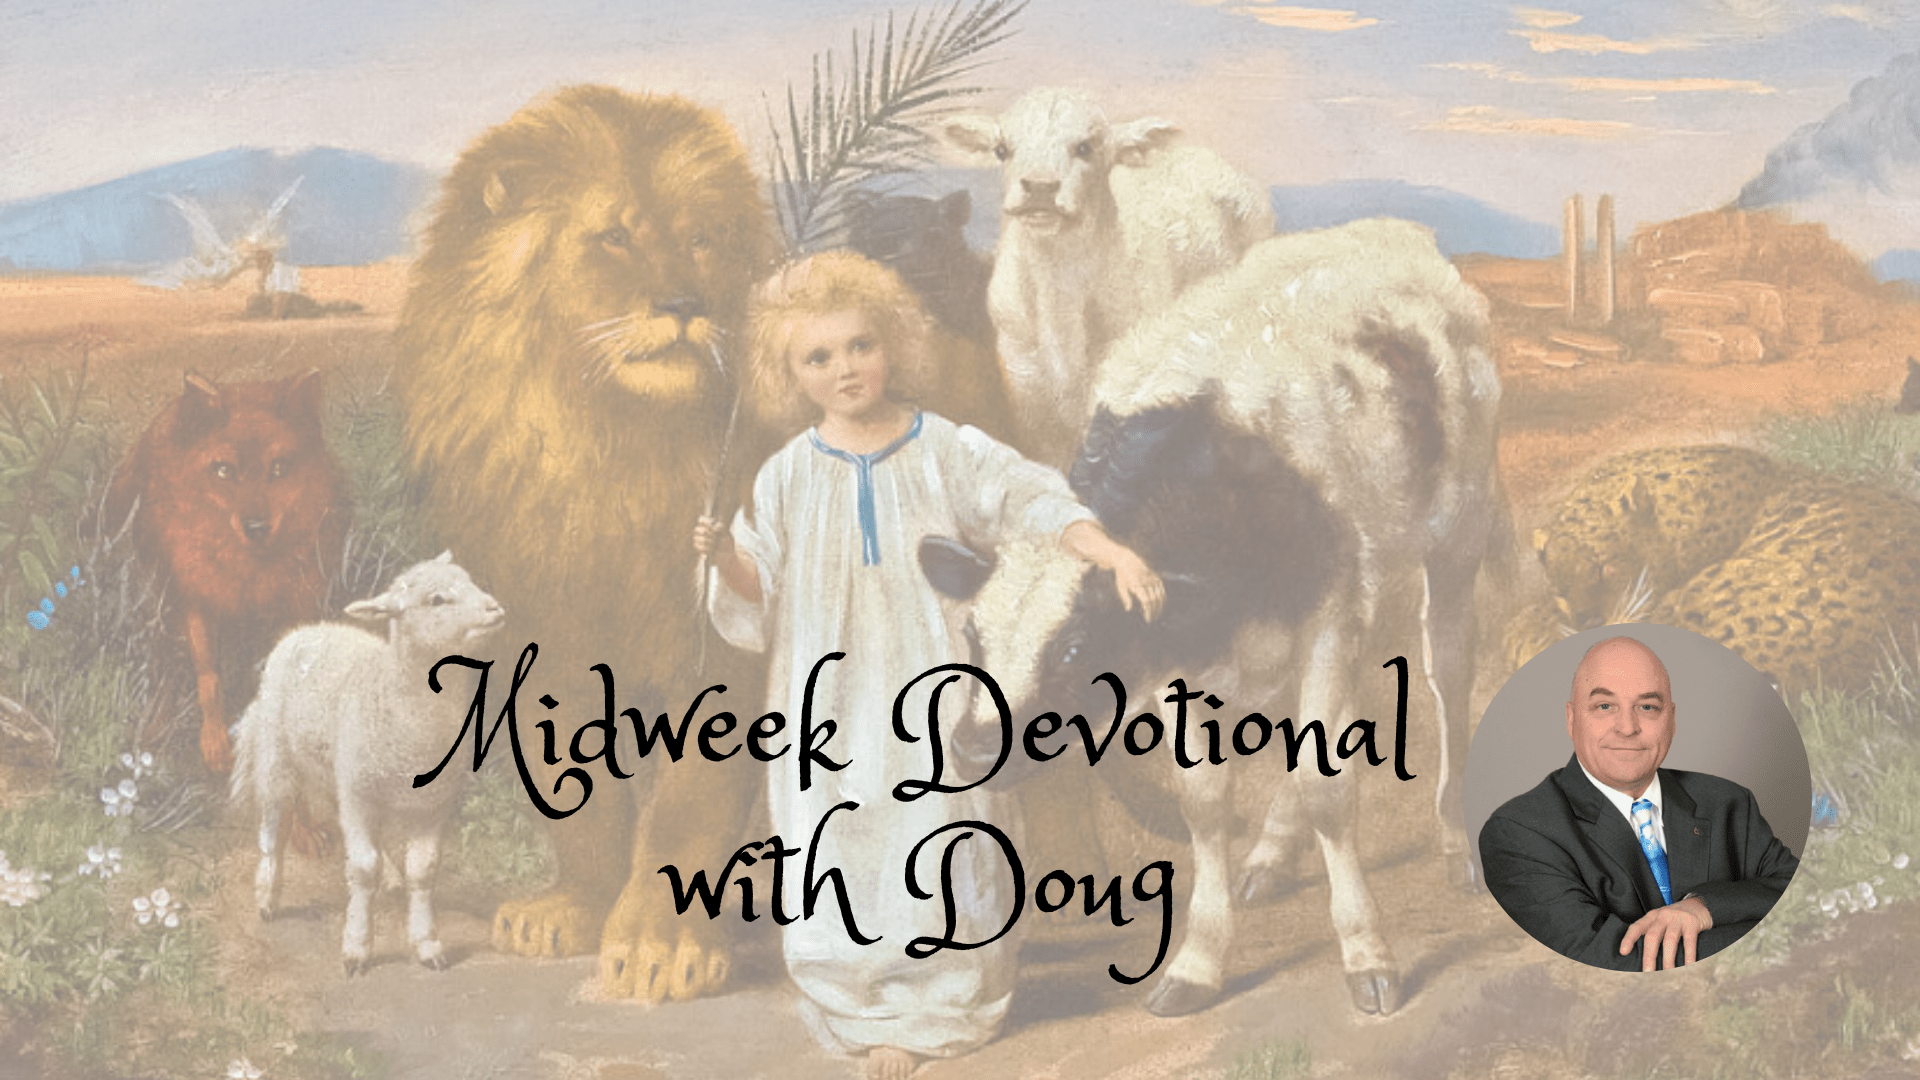 Midweek Devotional with Doug for first week of October